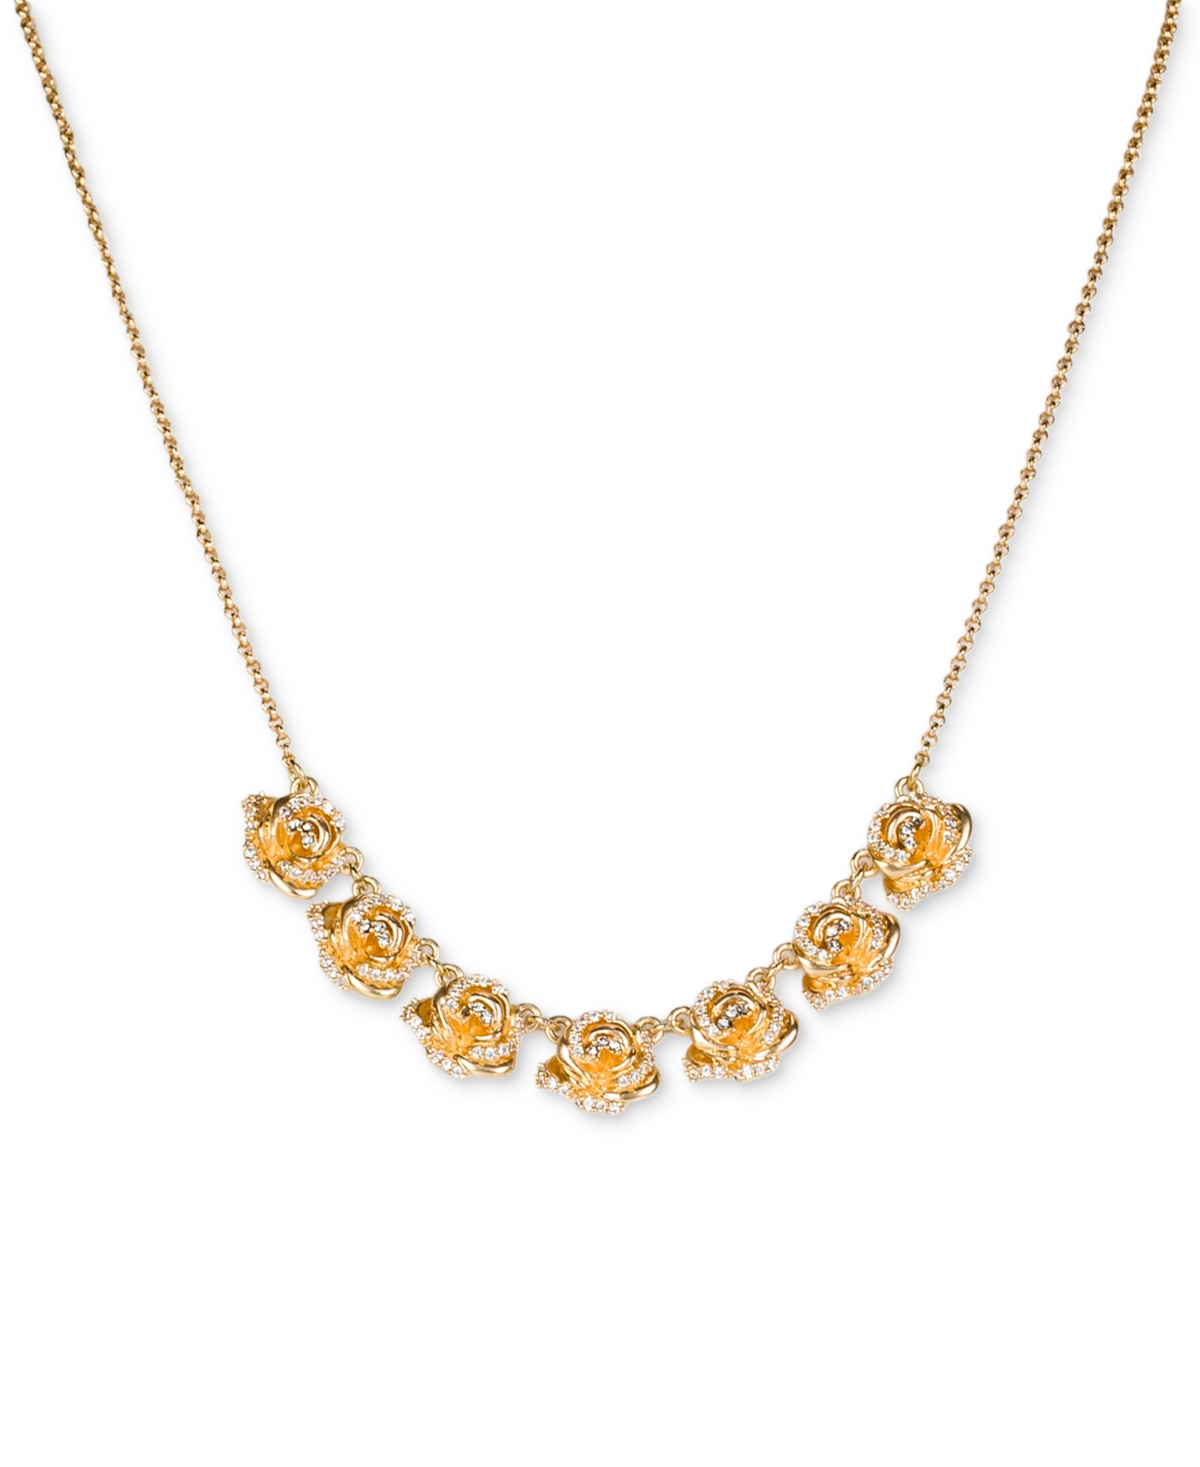 Patricia Nash Gold-tone Seven Pave Rose Statement Necklace, 17" + 2" Extender In Matte Gold